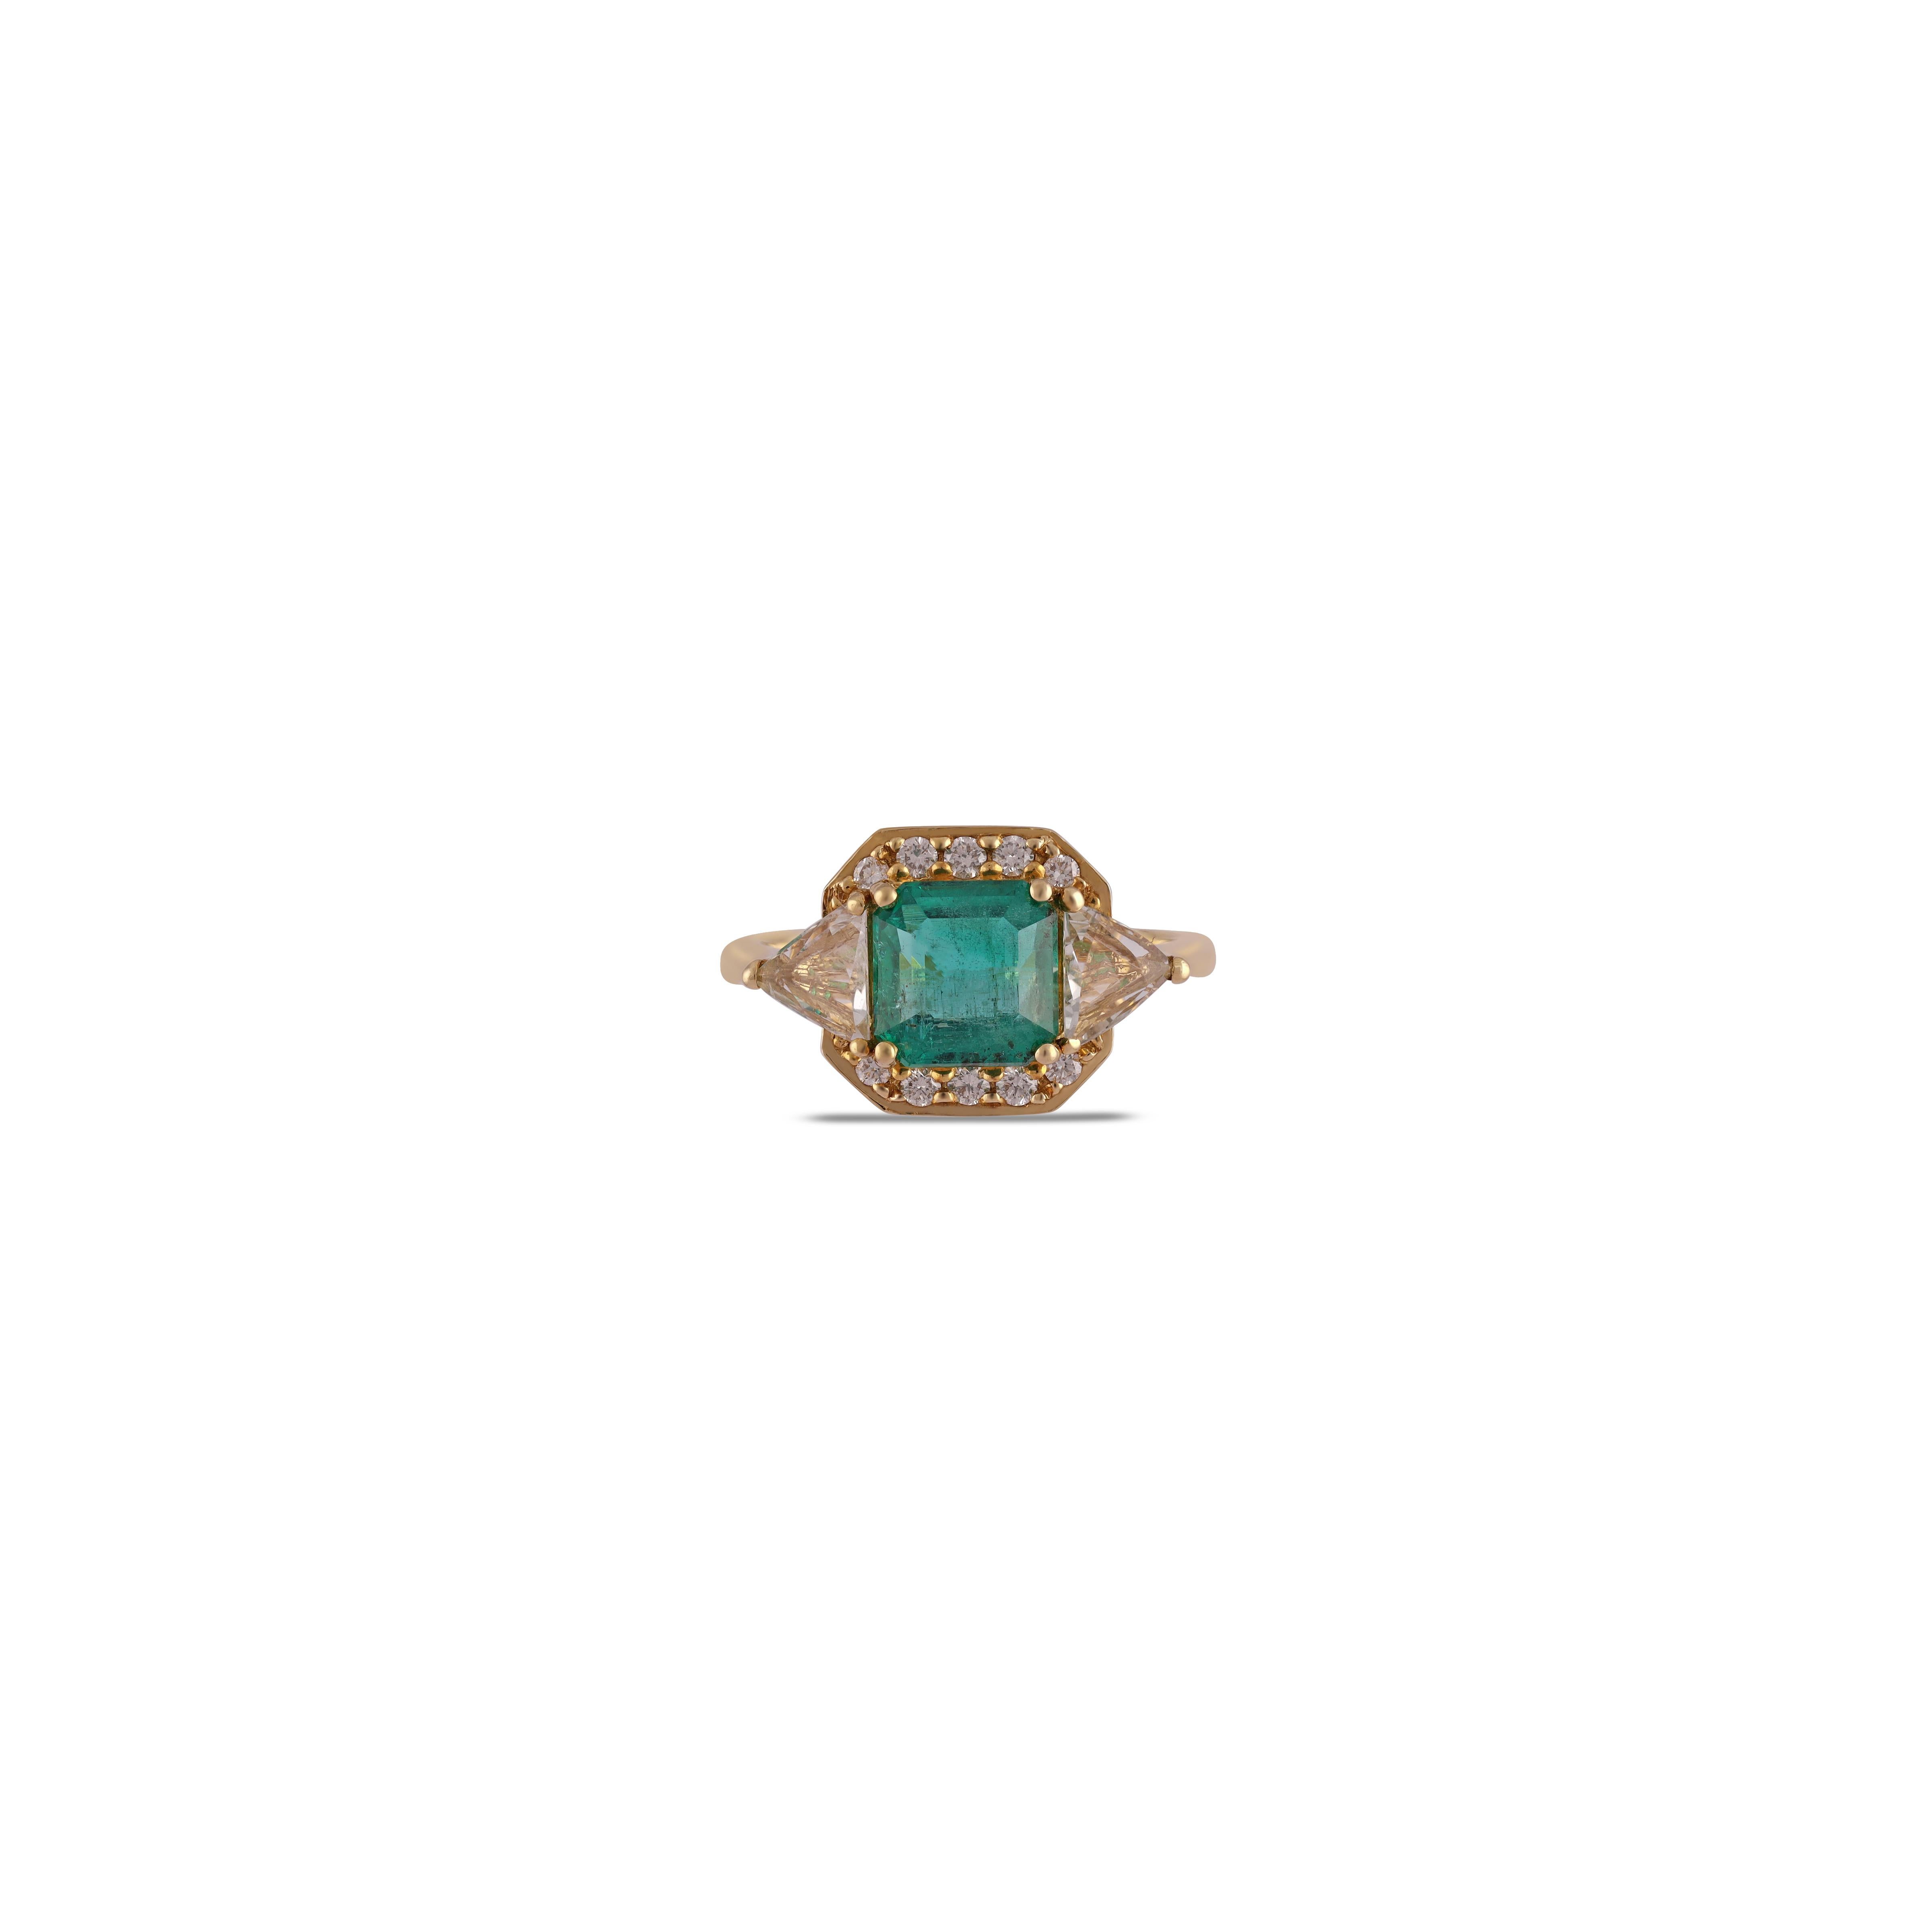 This is an elegant emerald & diamond ring studded in 18k Yellow gold with 1 piece of  Zambian emerald weight 2.24 carat which is surrounded by 10 pieces of round shaped diamonds weight 0.18 carat with White sapphire Weight 0.91 carat  this entire